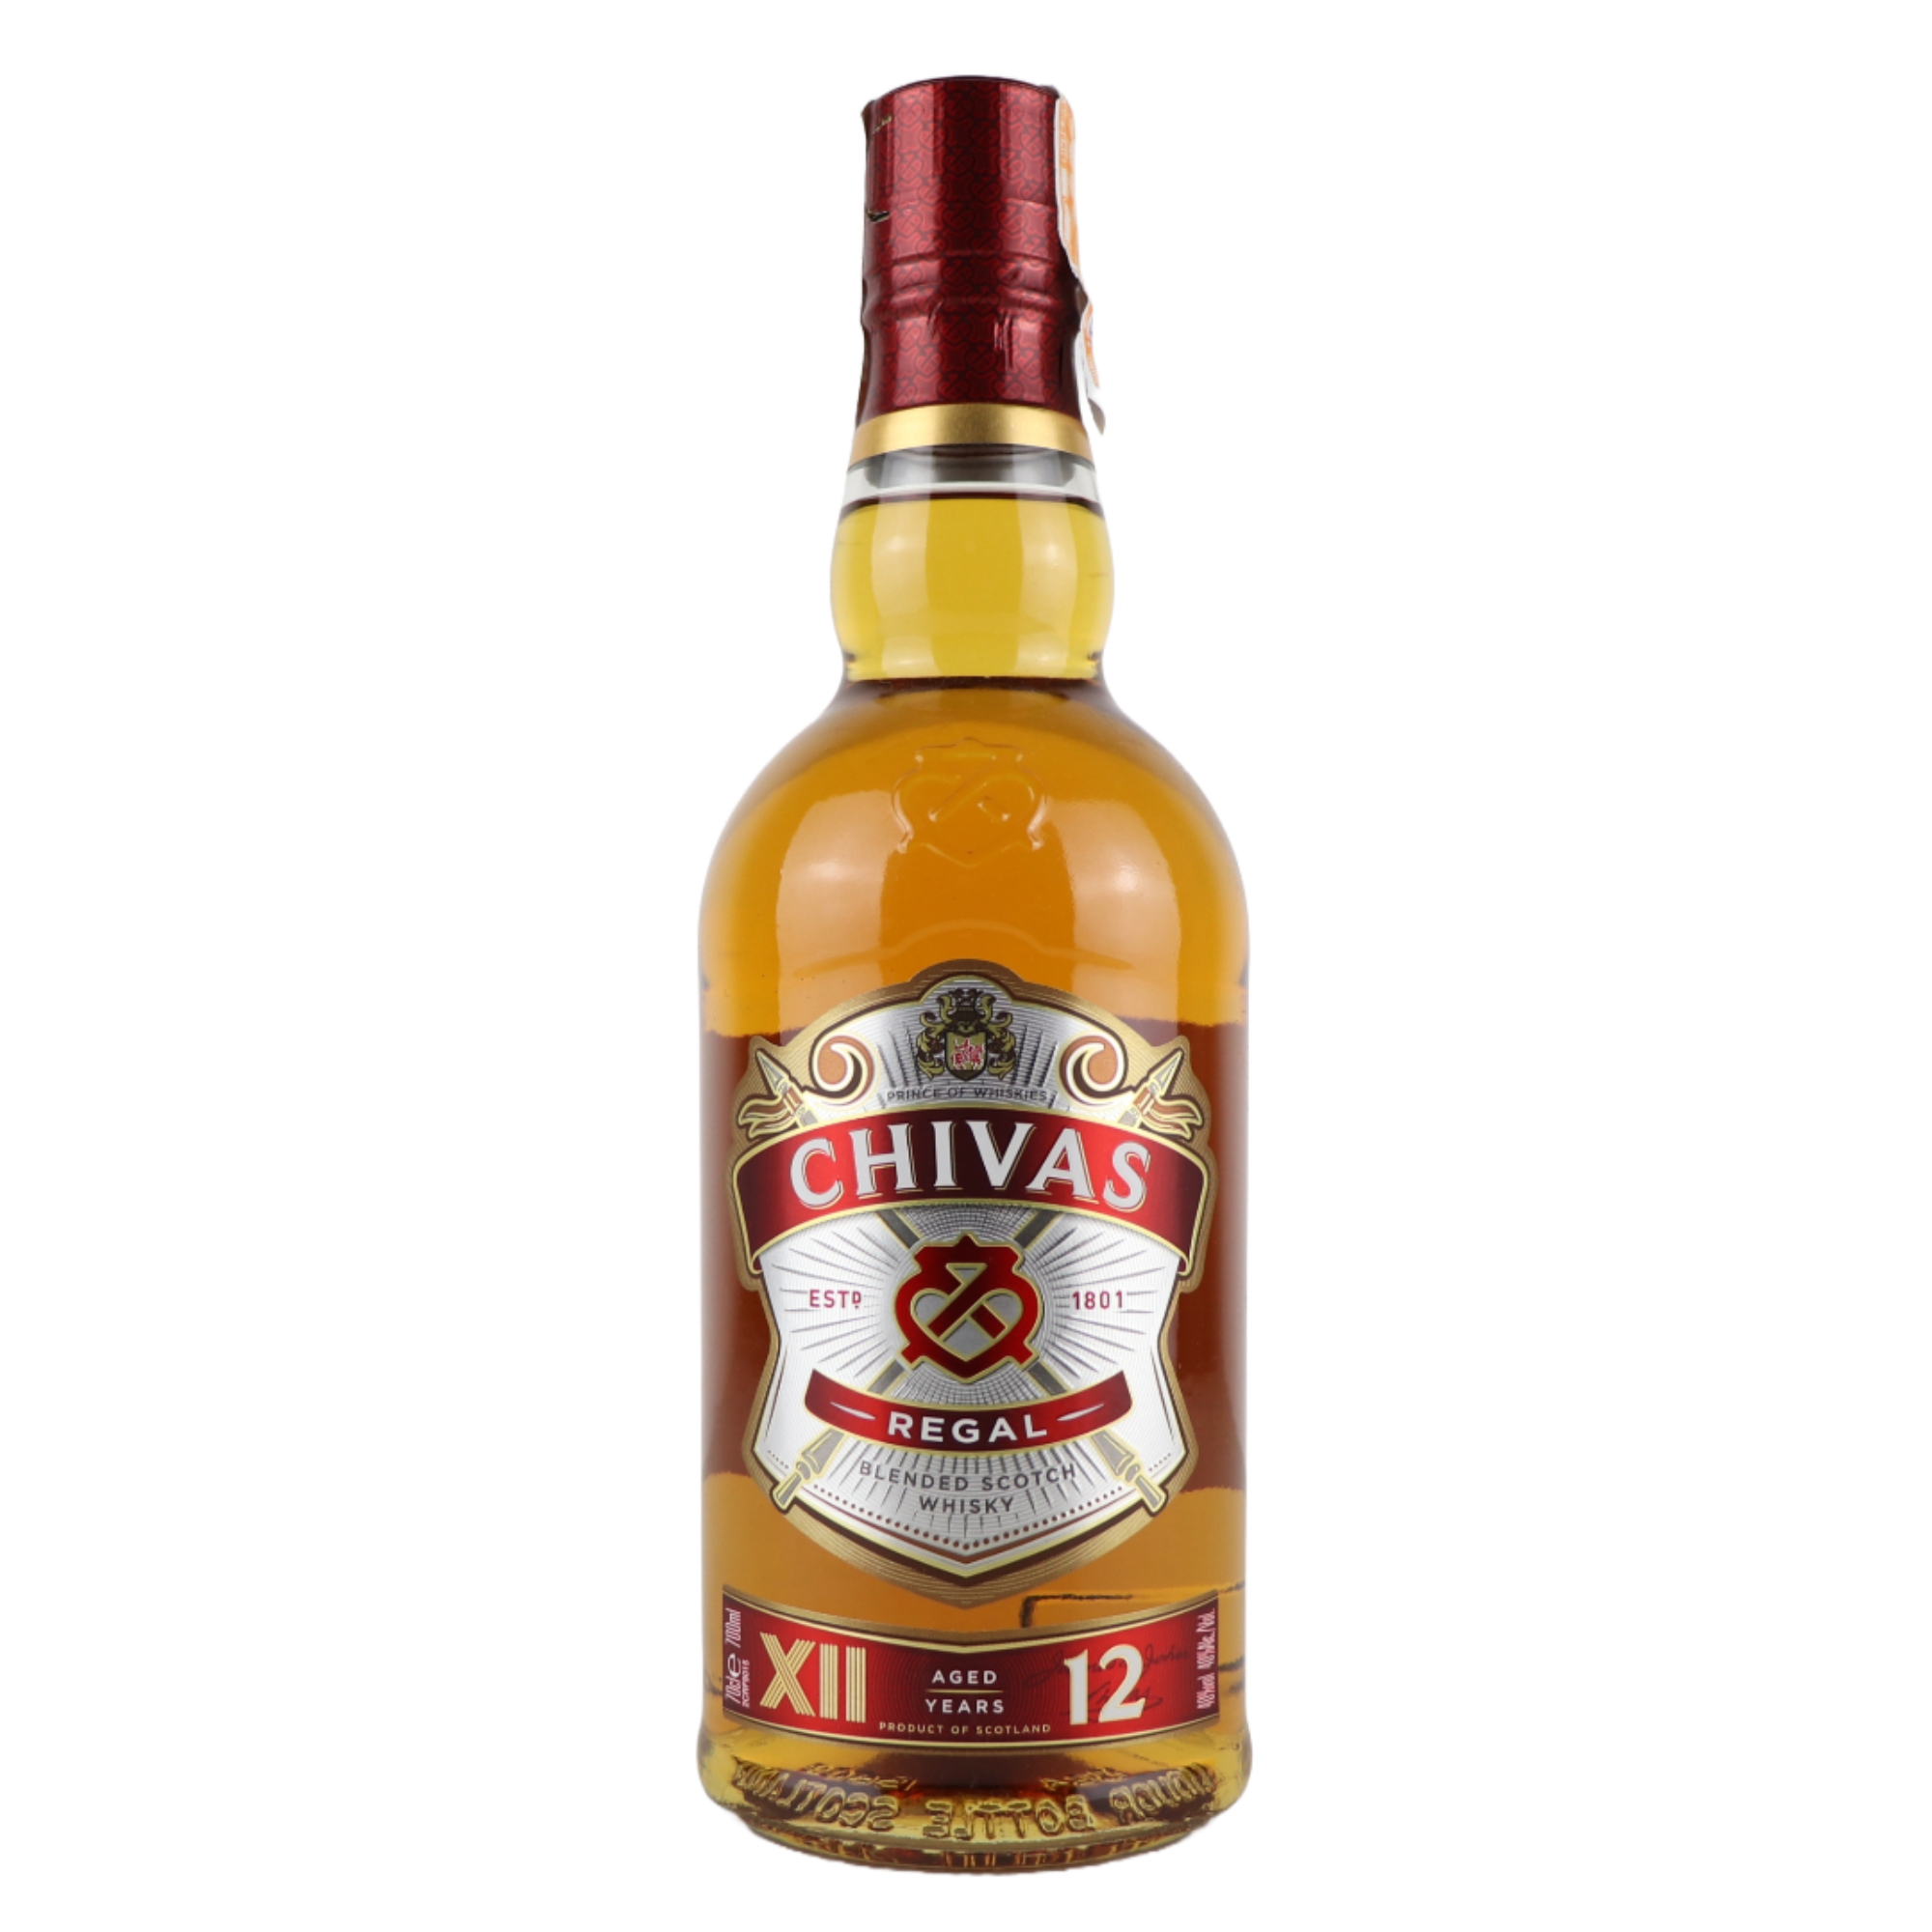 Chivas Regal Aged 12 Years Blended Scotch Whisky 700mL